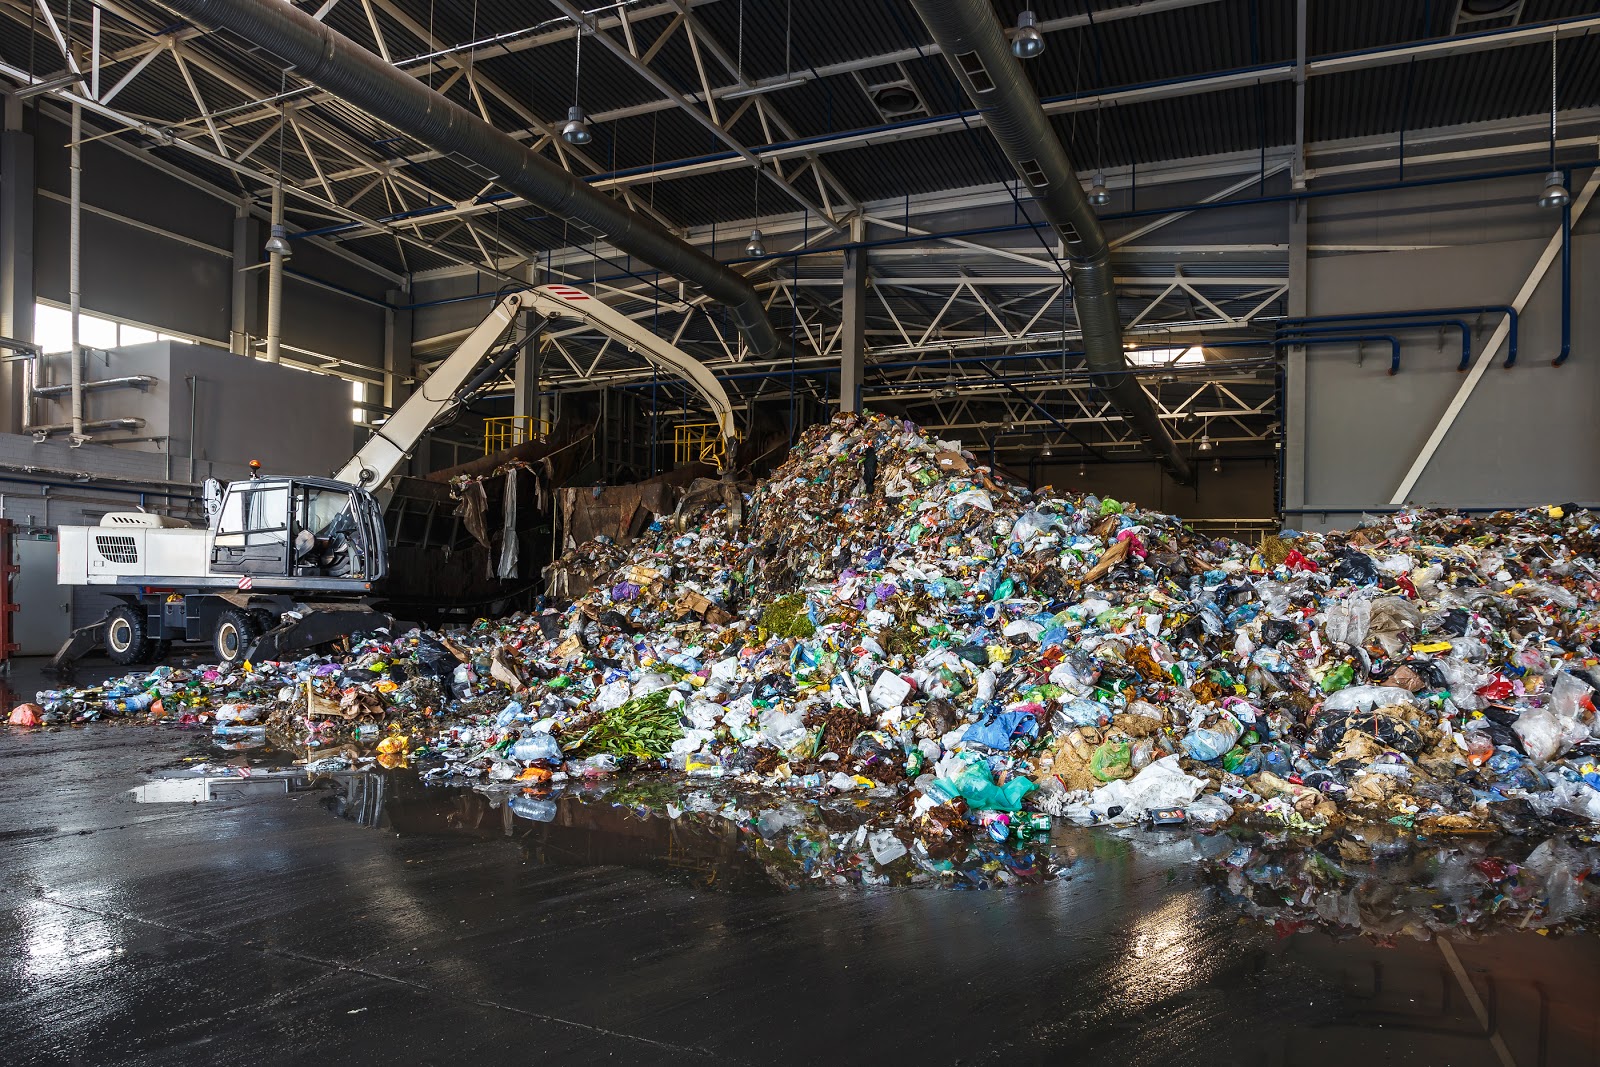 It is probably obvious that estimations of the daily and weekly waste volume would be important when designing a waste transfer station. A savvy planner remembers to include room for growth and a possible rapid expansion as the community grows.